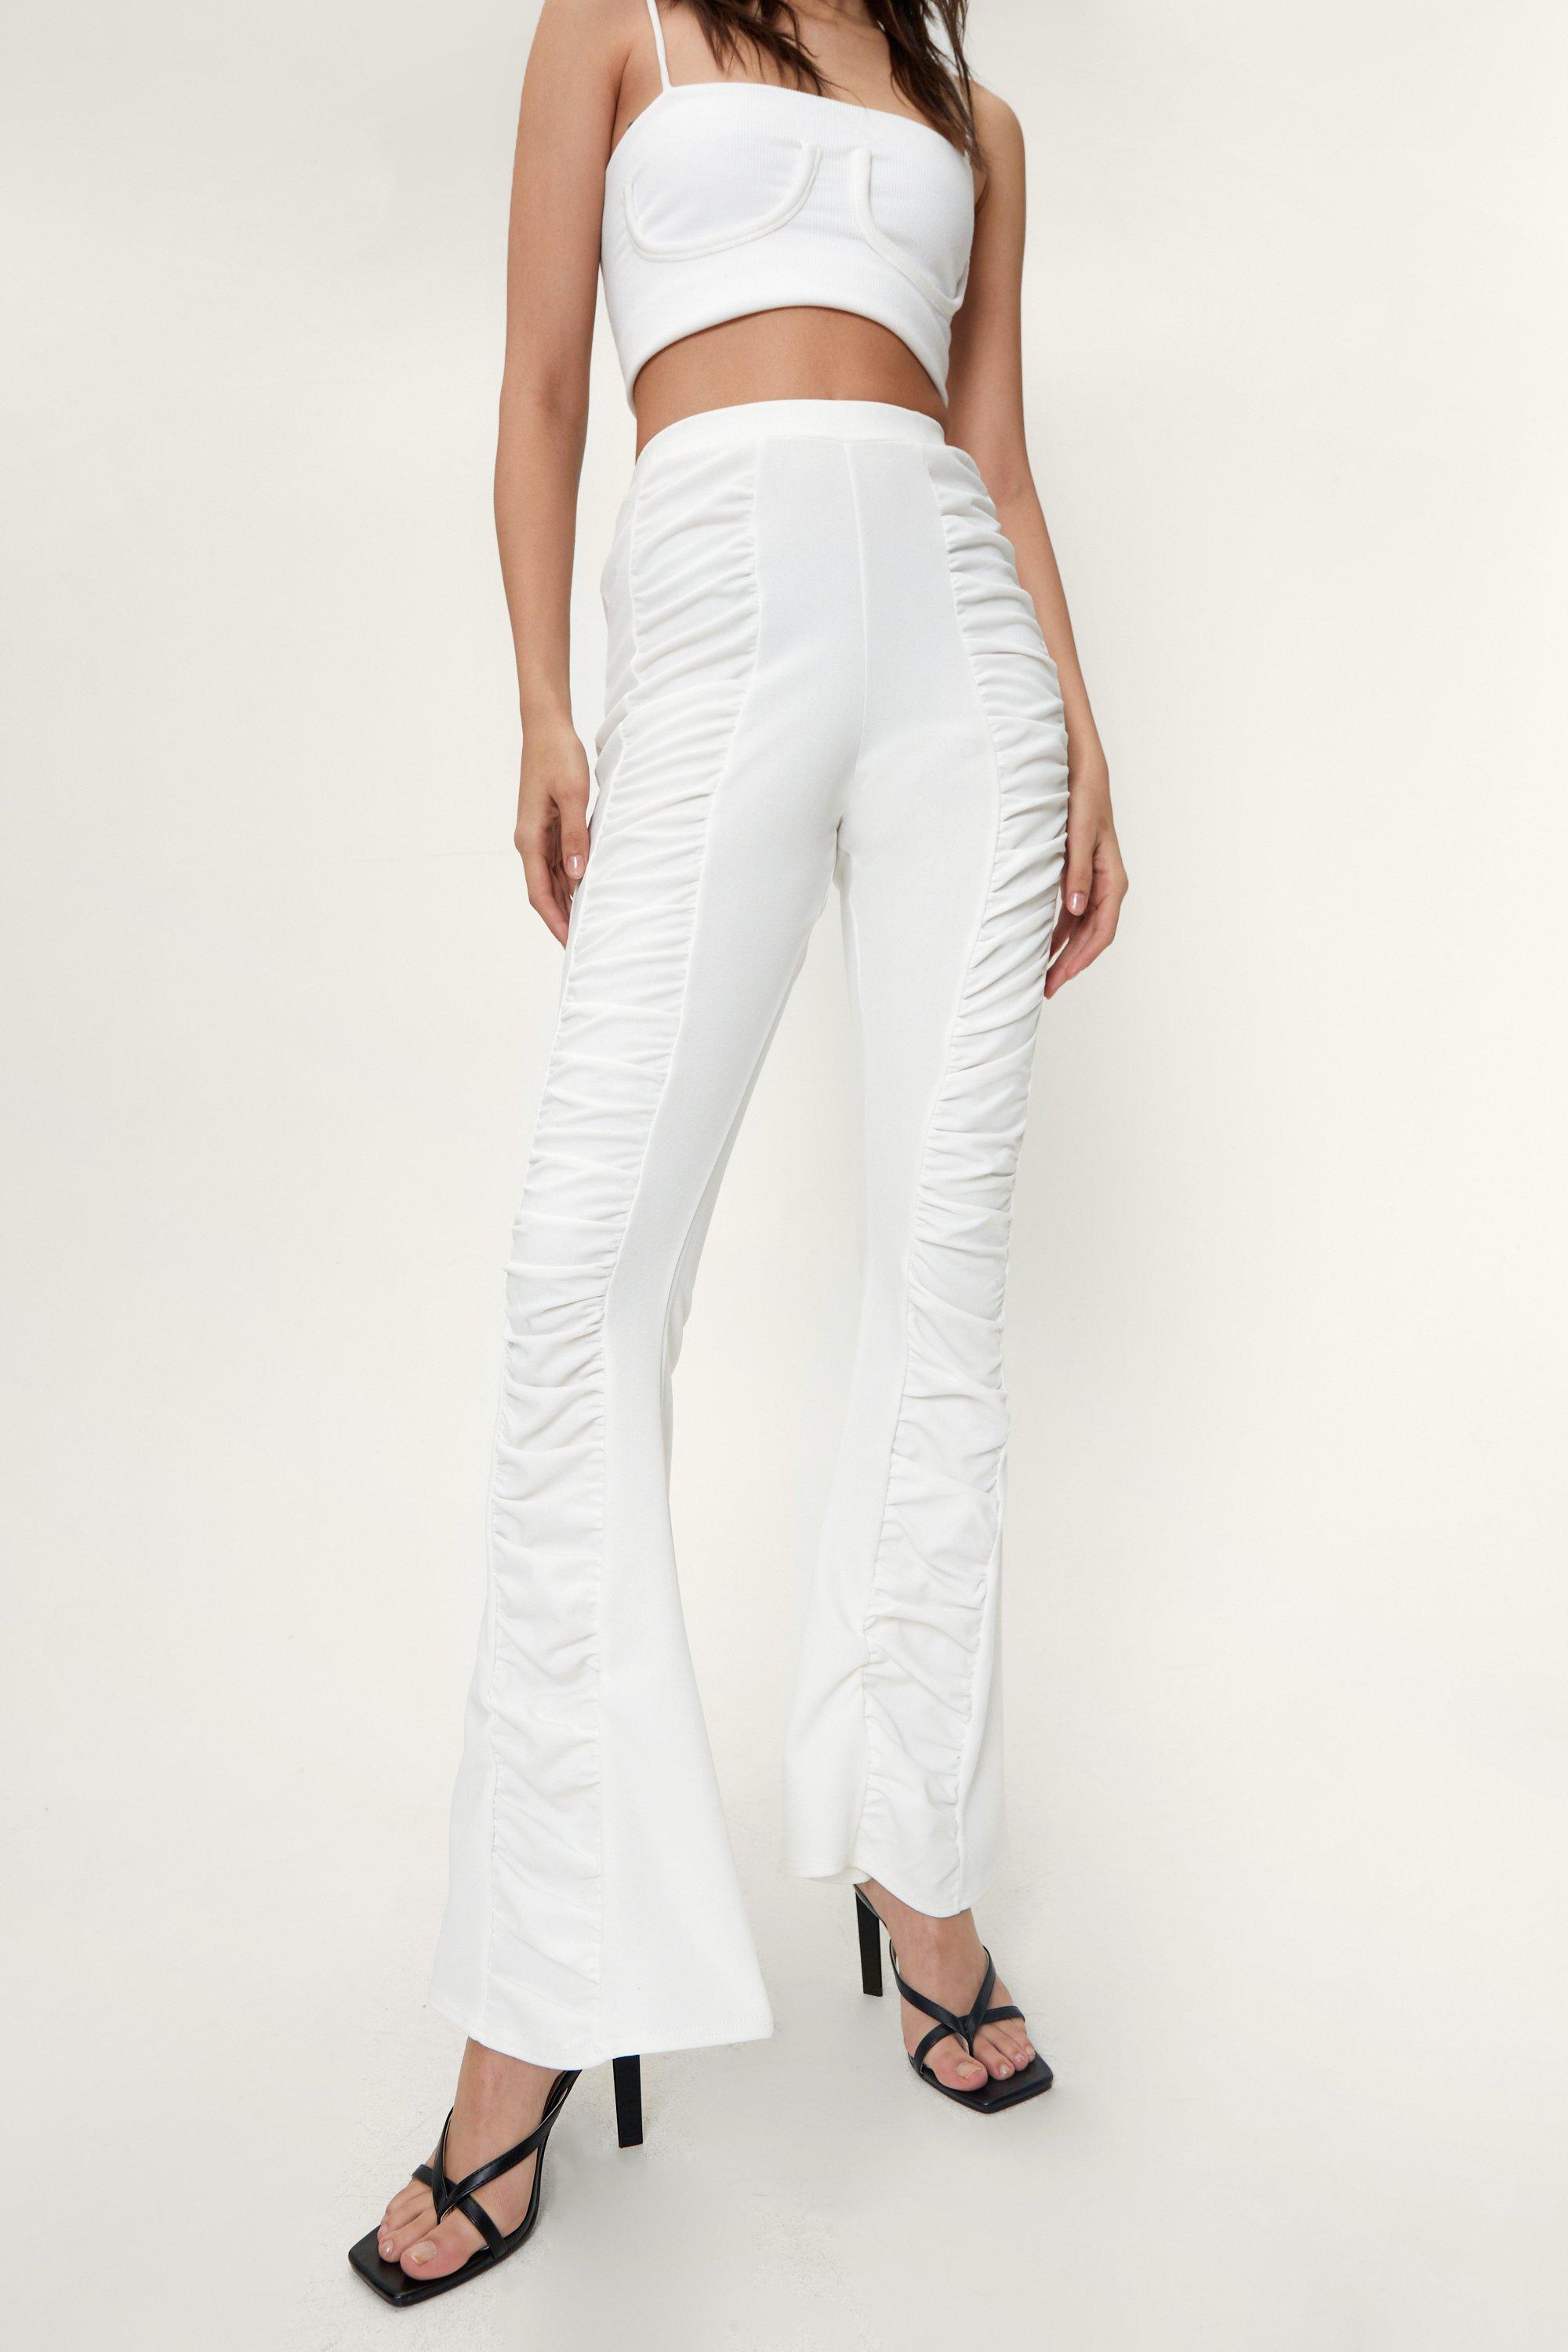 Ruched Front High Waisted Flared Pants